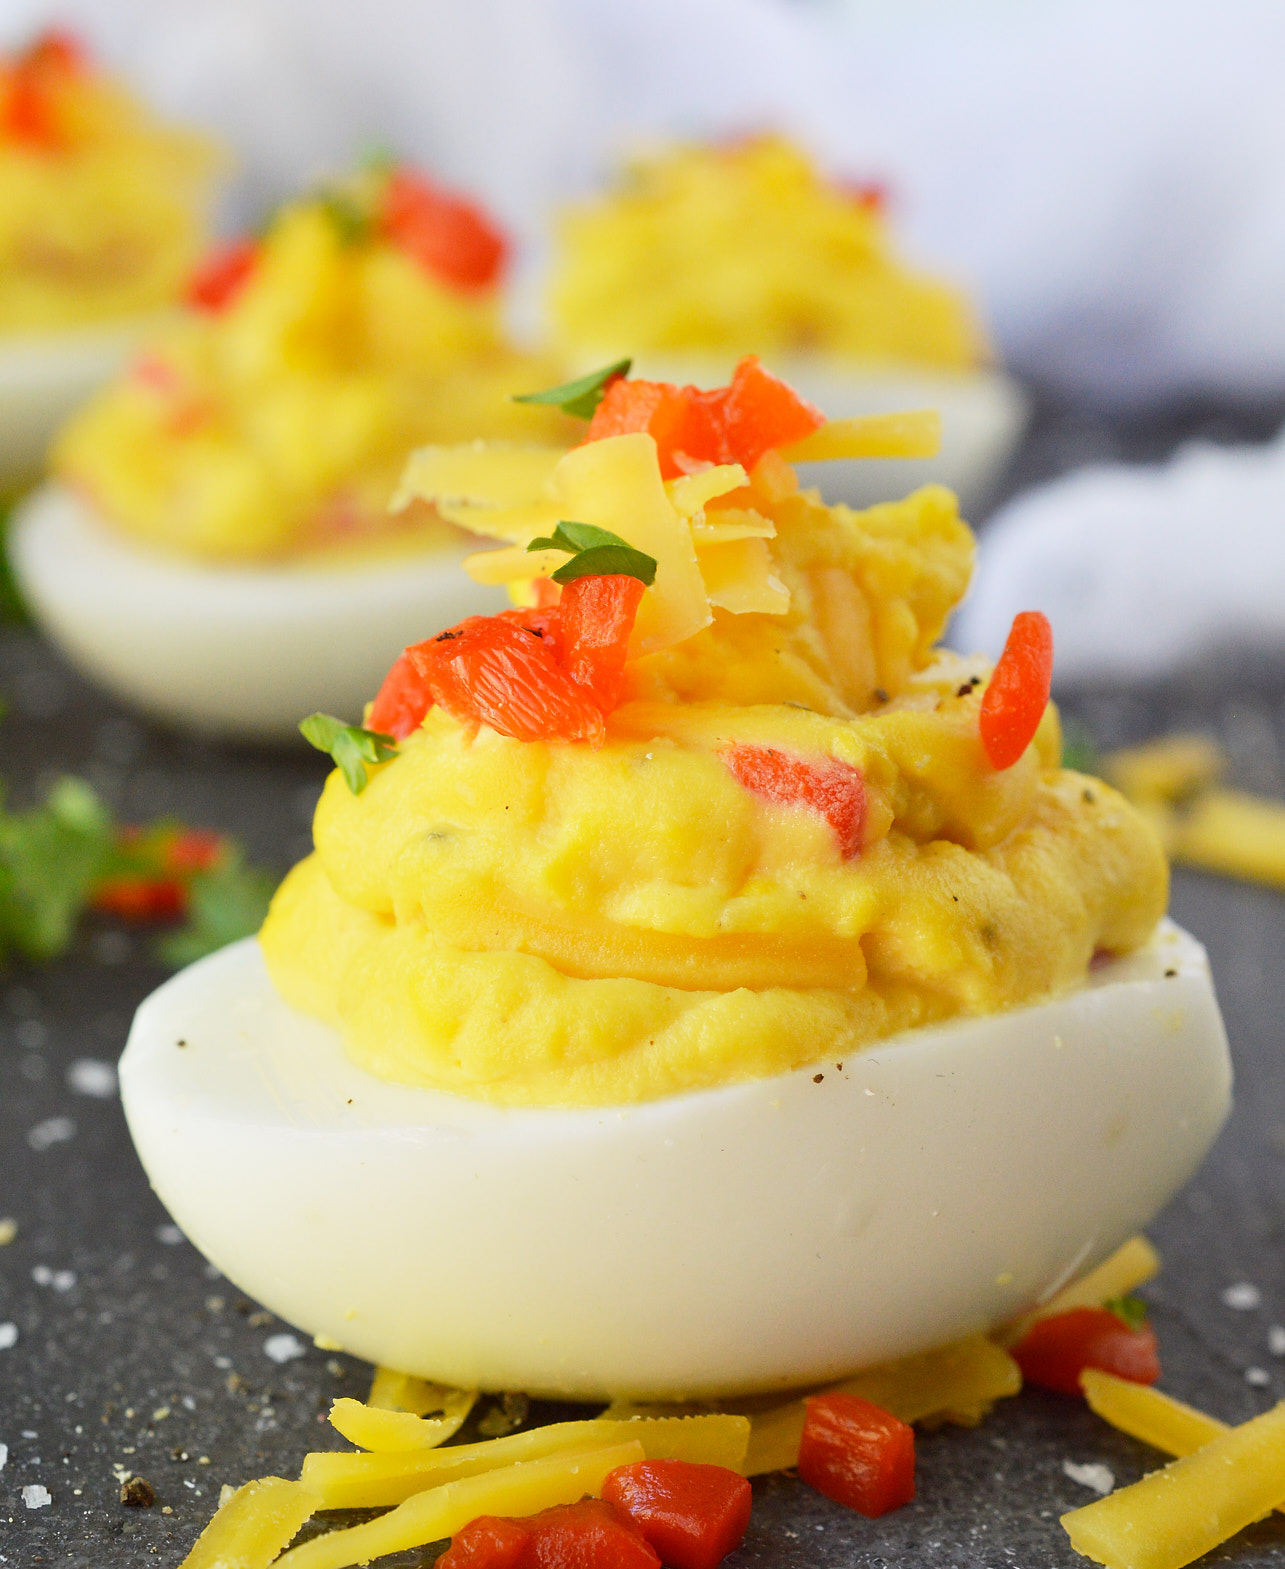 Pimento Cheese Deviled Eggs is a guaranteed crowd pleaser! This unique combo takes a favorite party appetizer recipe to the next level.